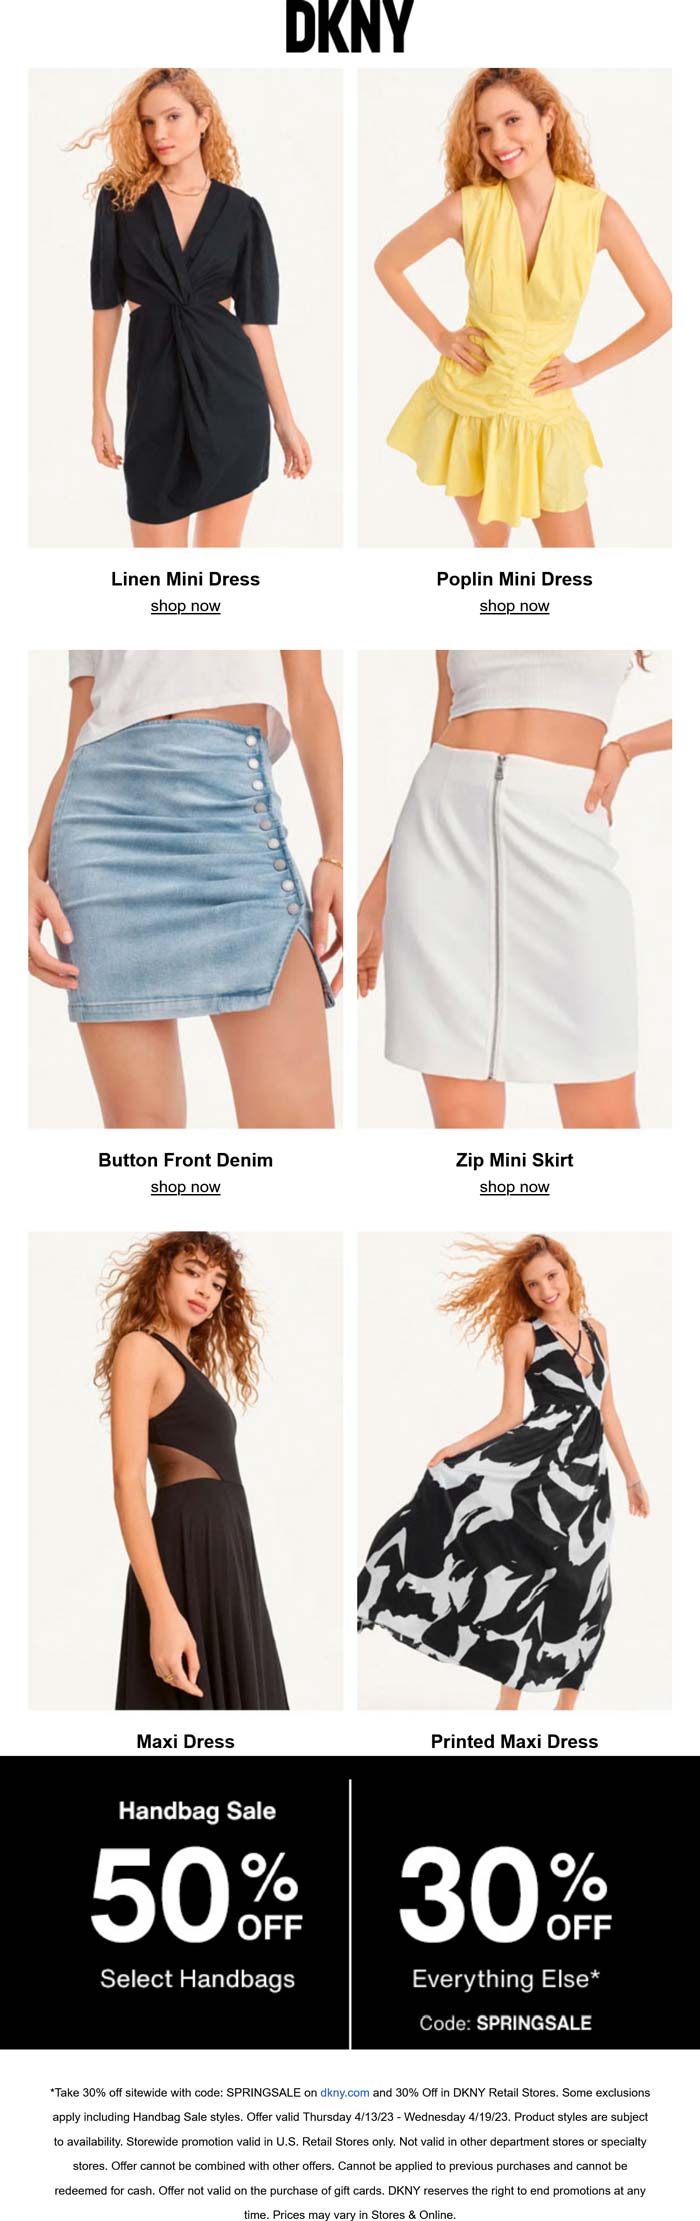 DKNY stores Coupon  30% off everything & more at DKNY, or online via promo code SPRINGSALE #dkny 